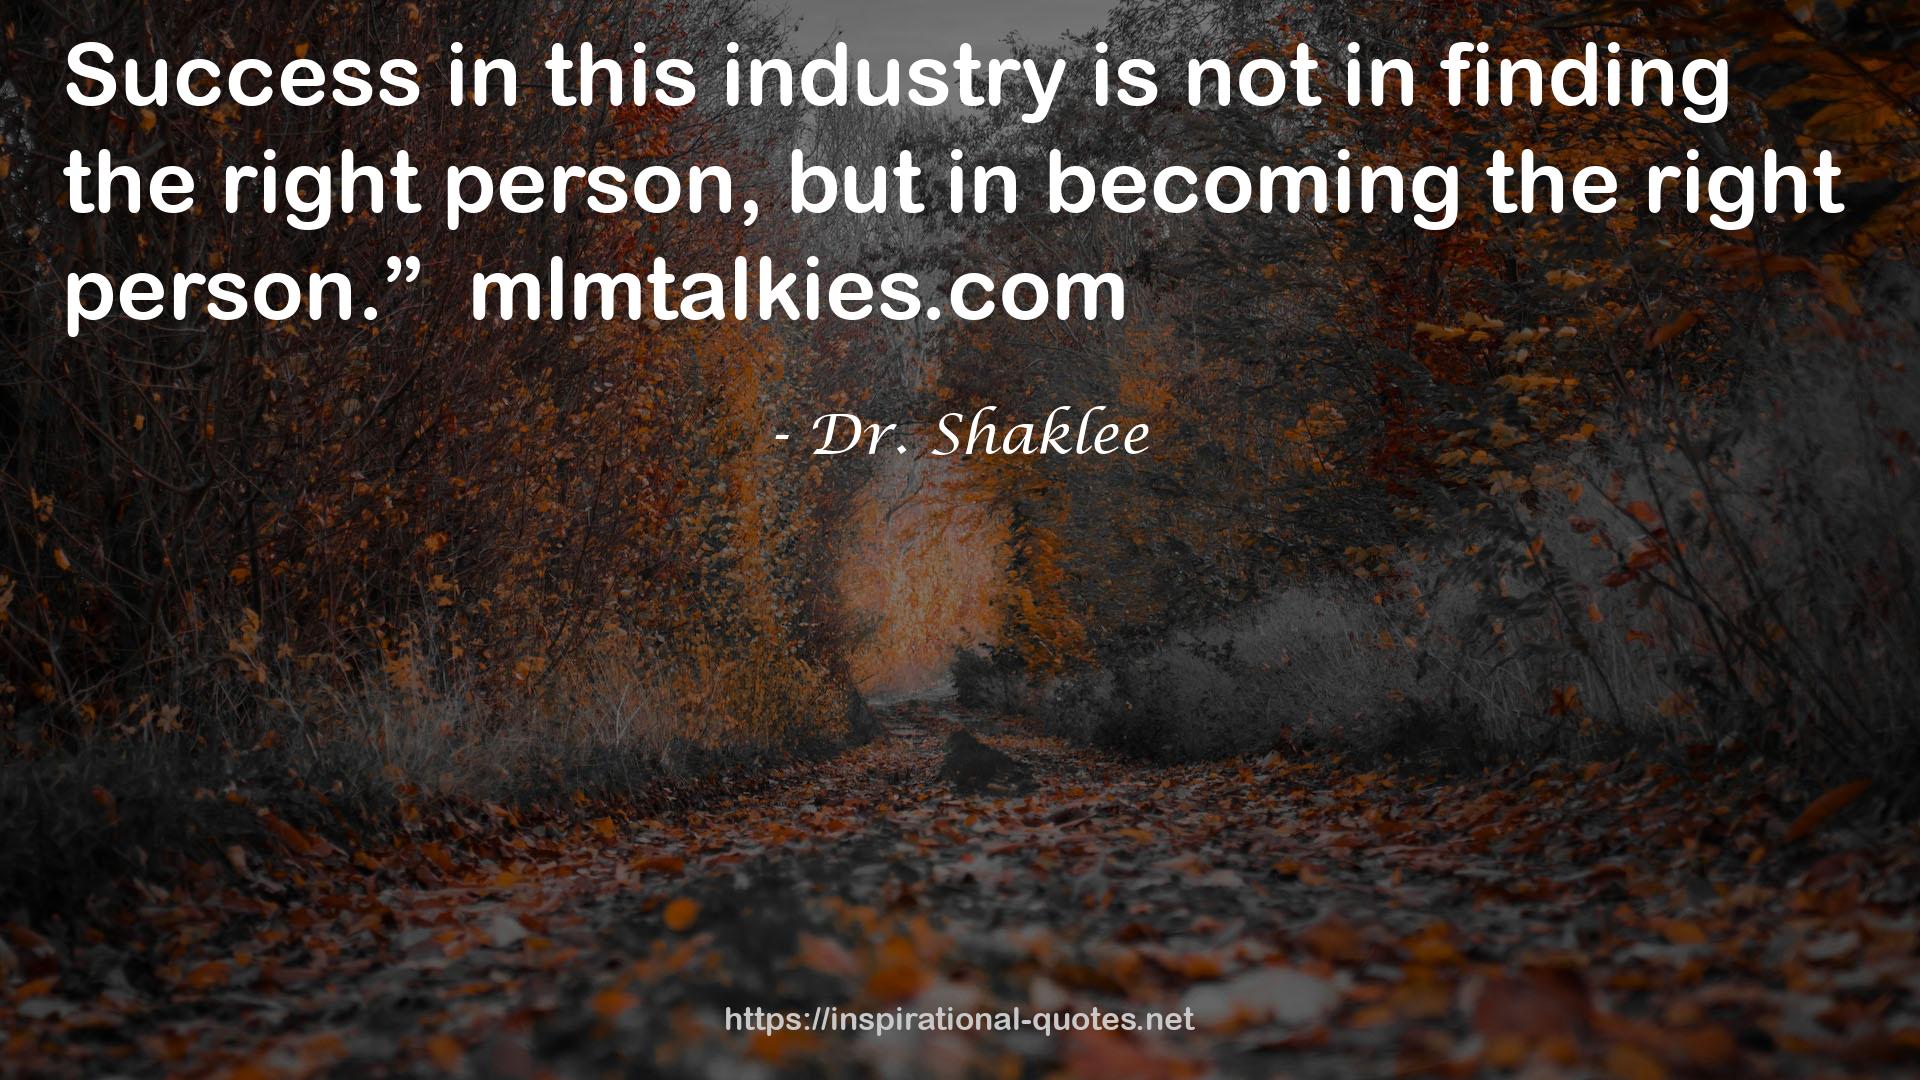 Dr. Shaklee QUOTES